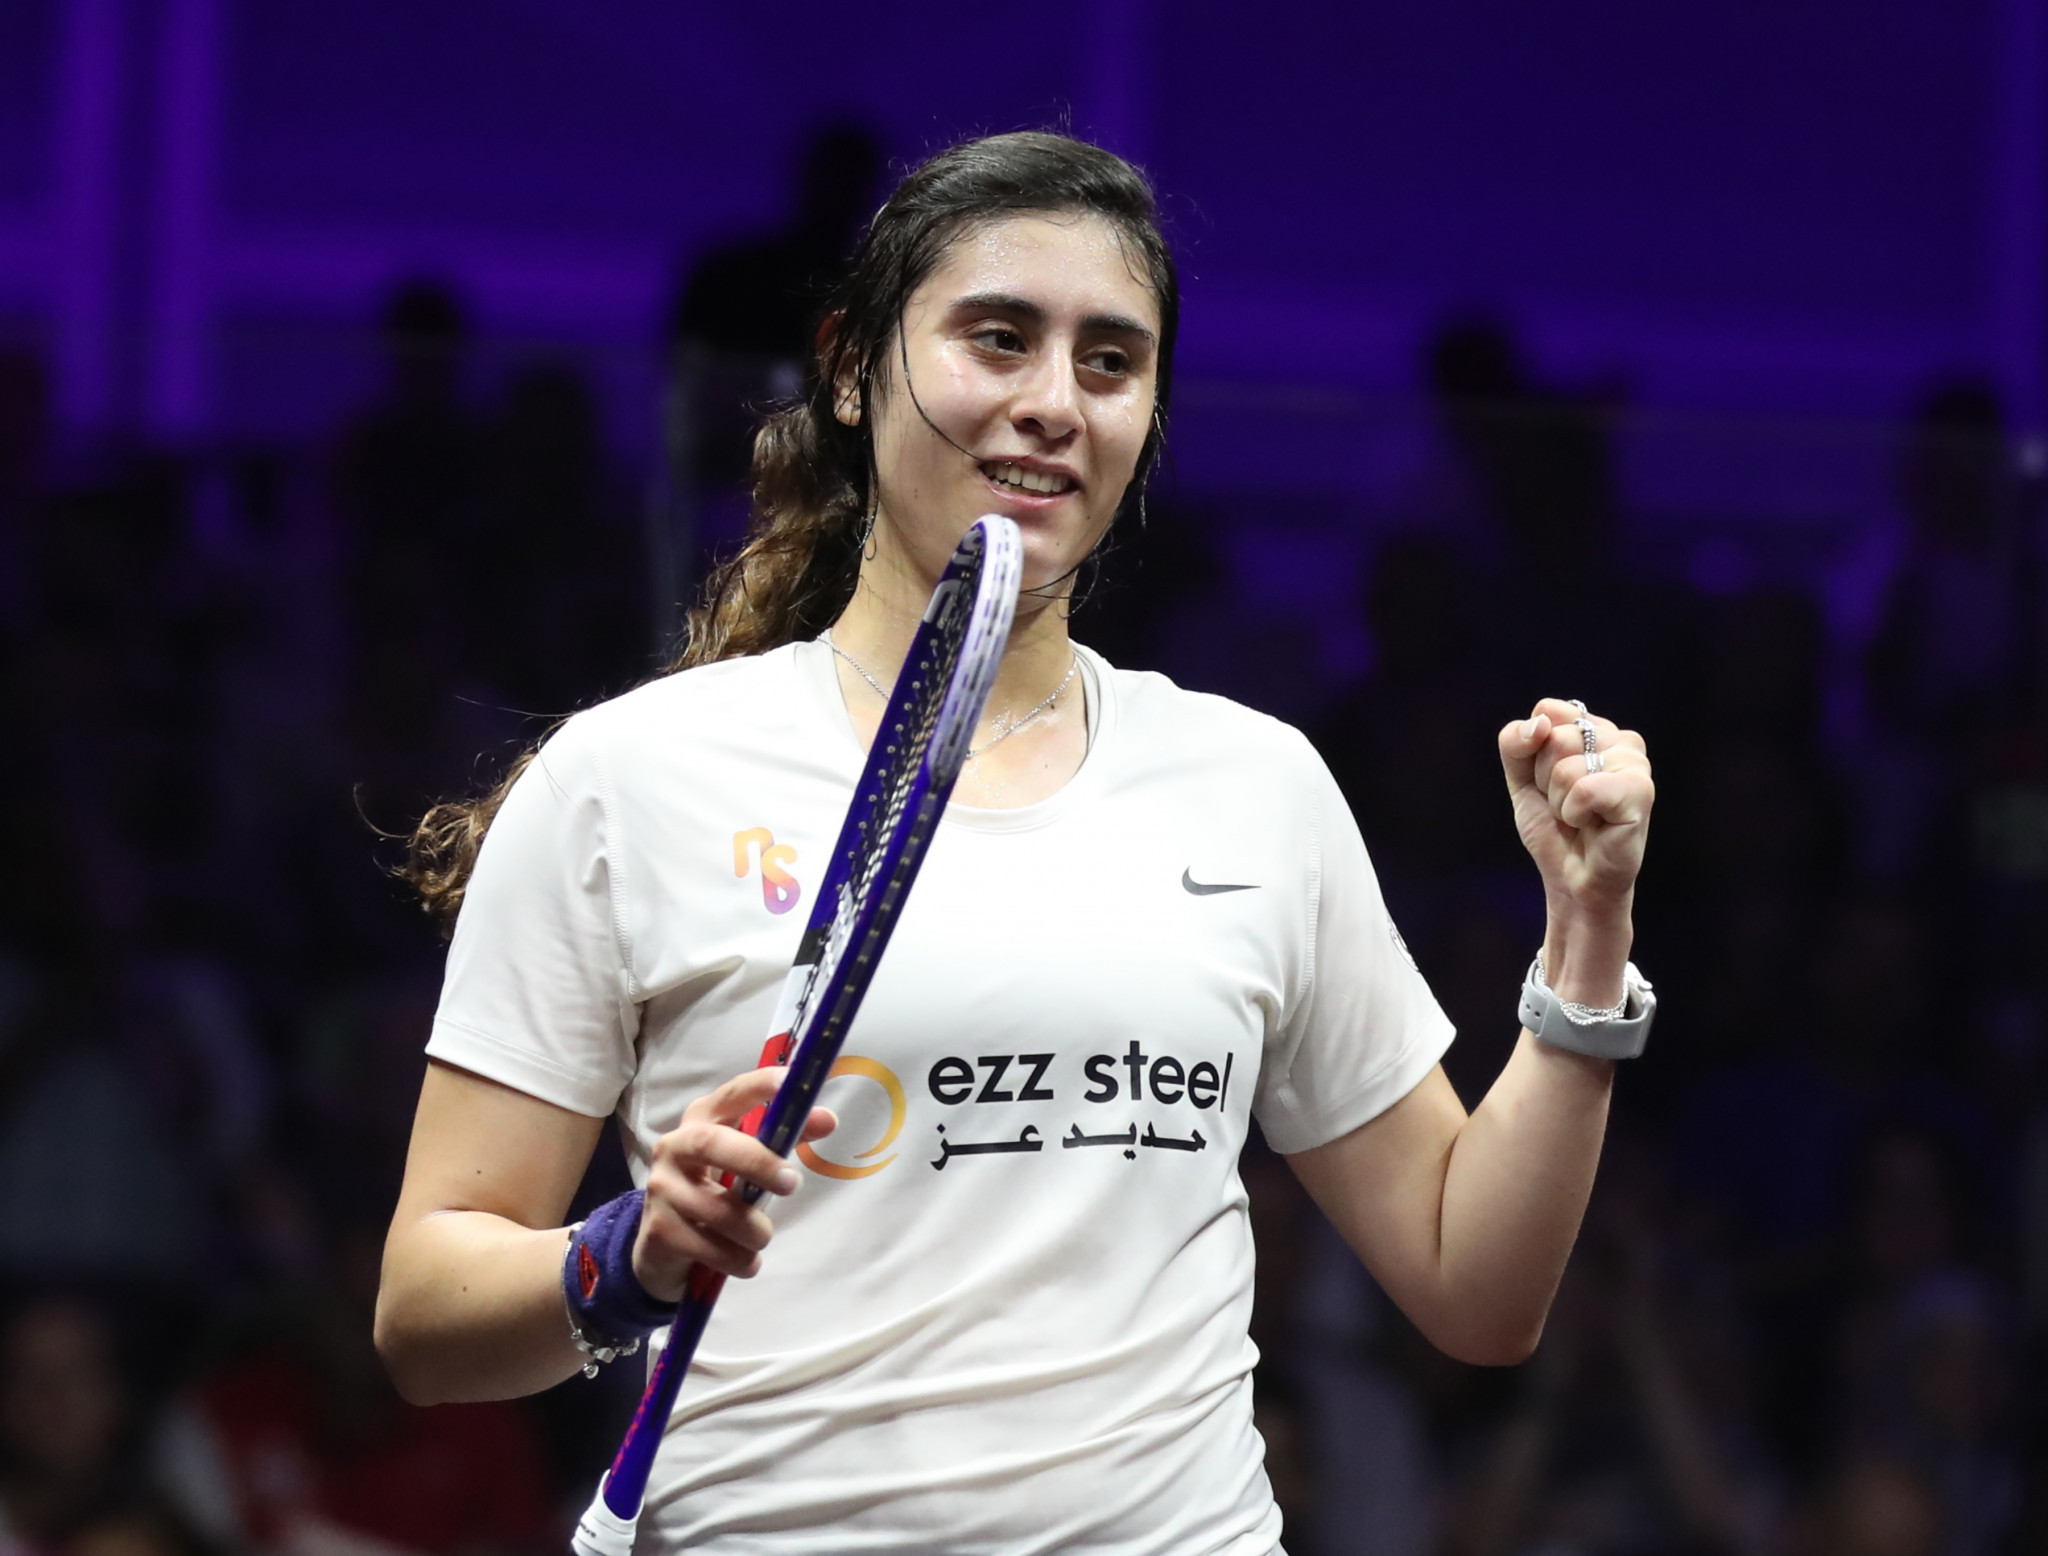 El Sherbini to retain world number one ranking after reaching Black Ball Squash Open final